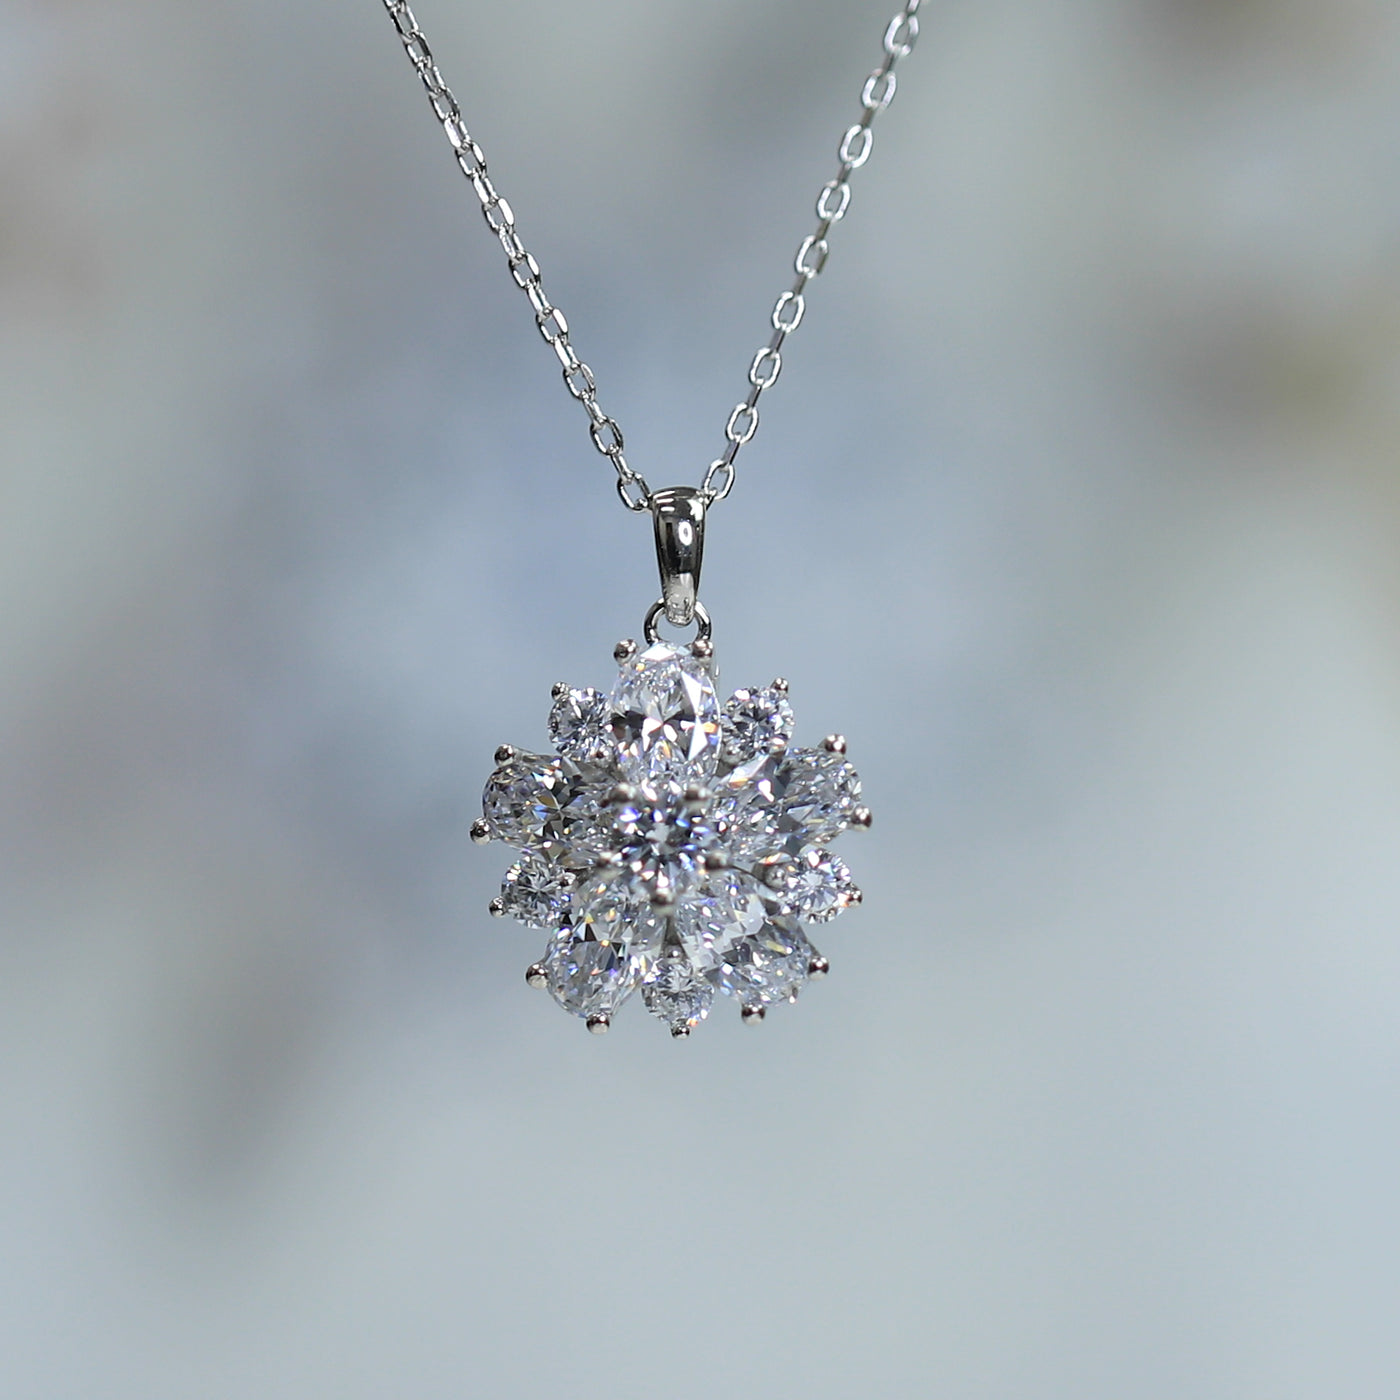 Cluster Flower Pendant Chain Necklace, Platinum Plated Sterling Silver